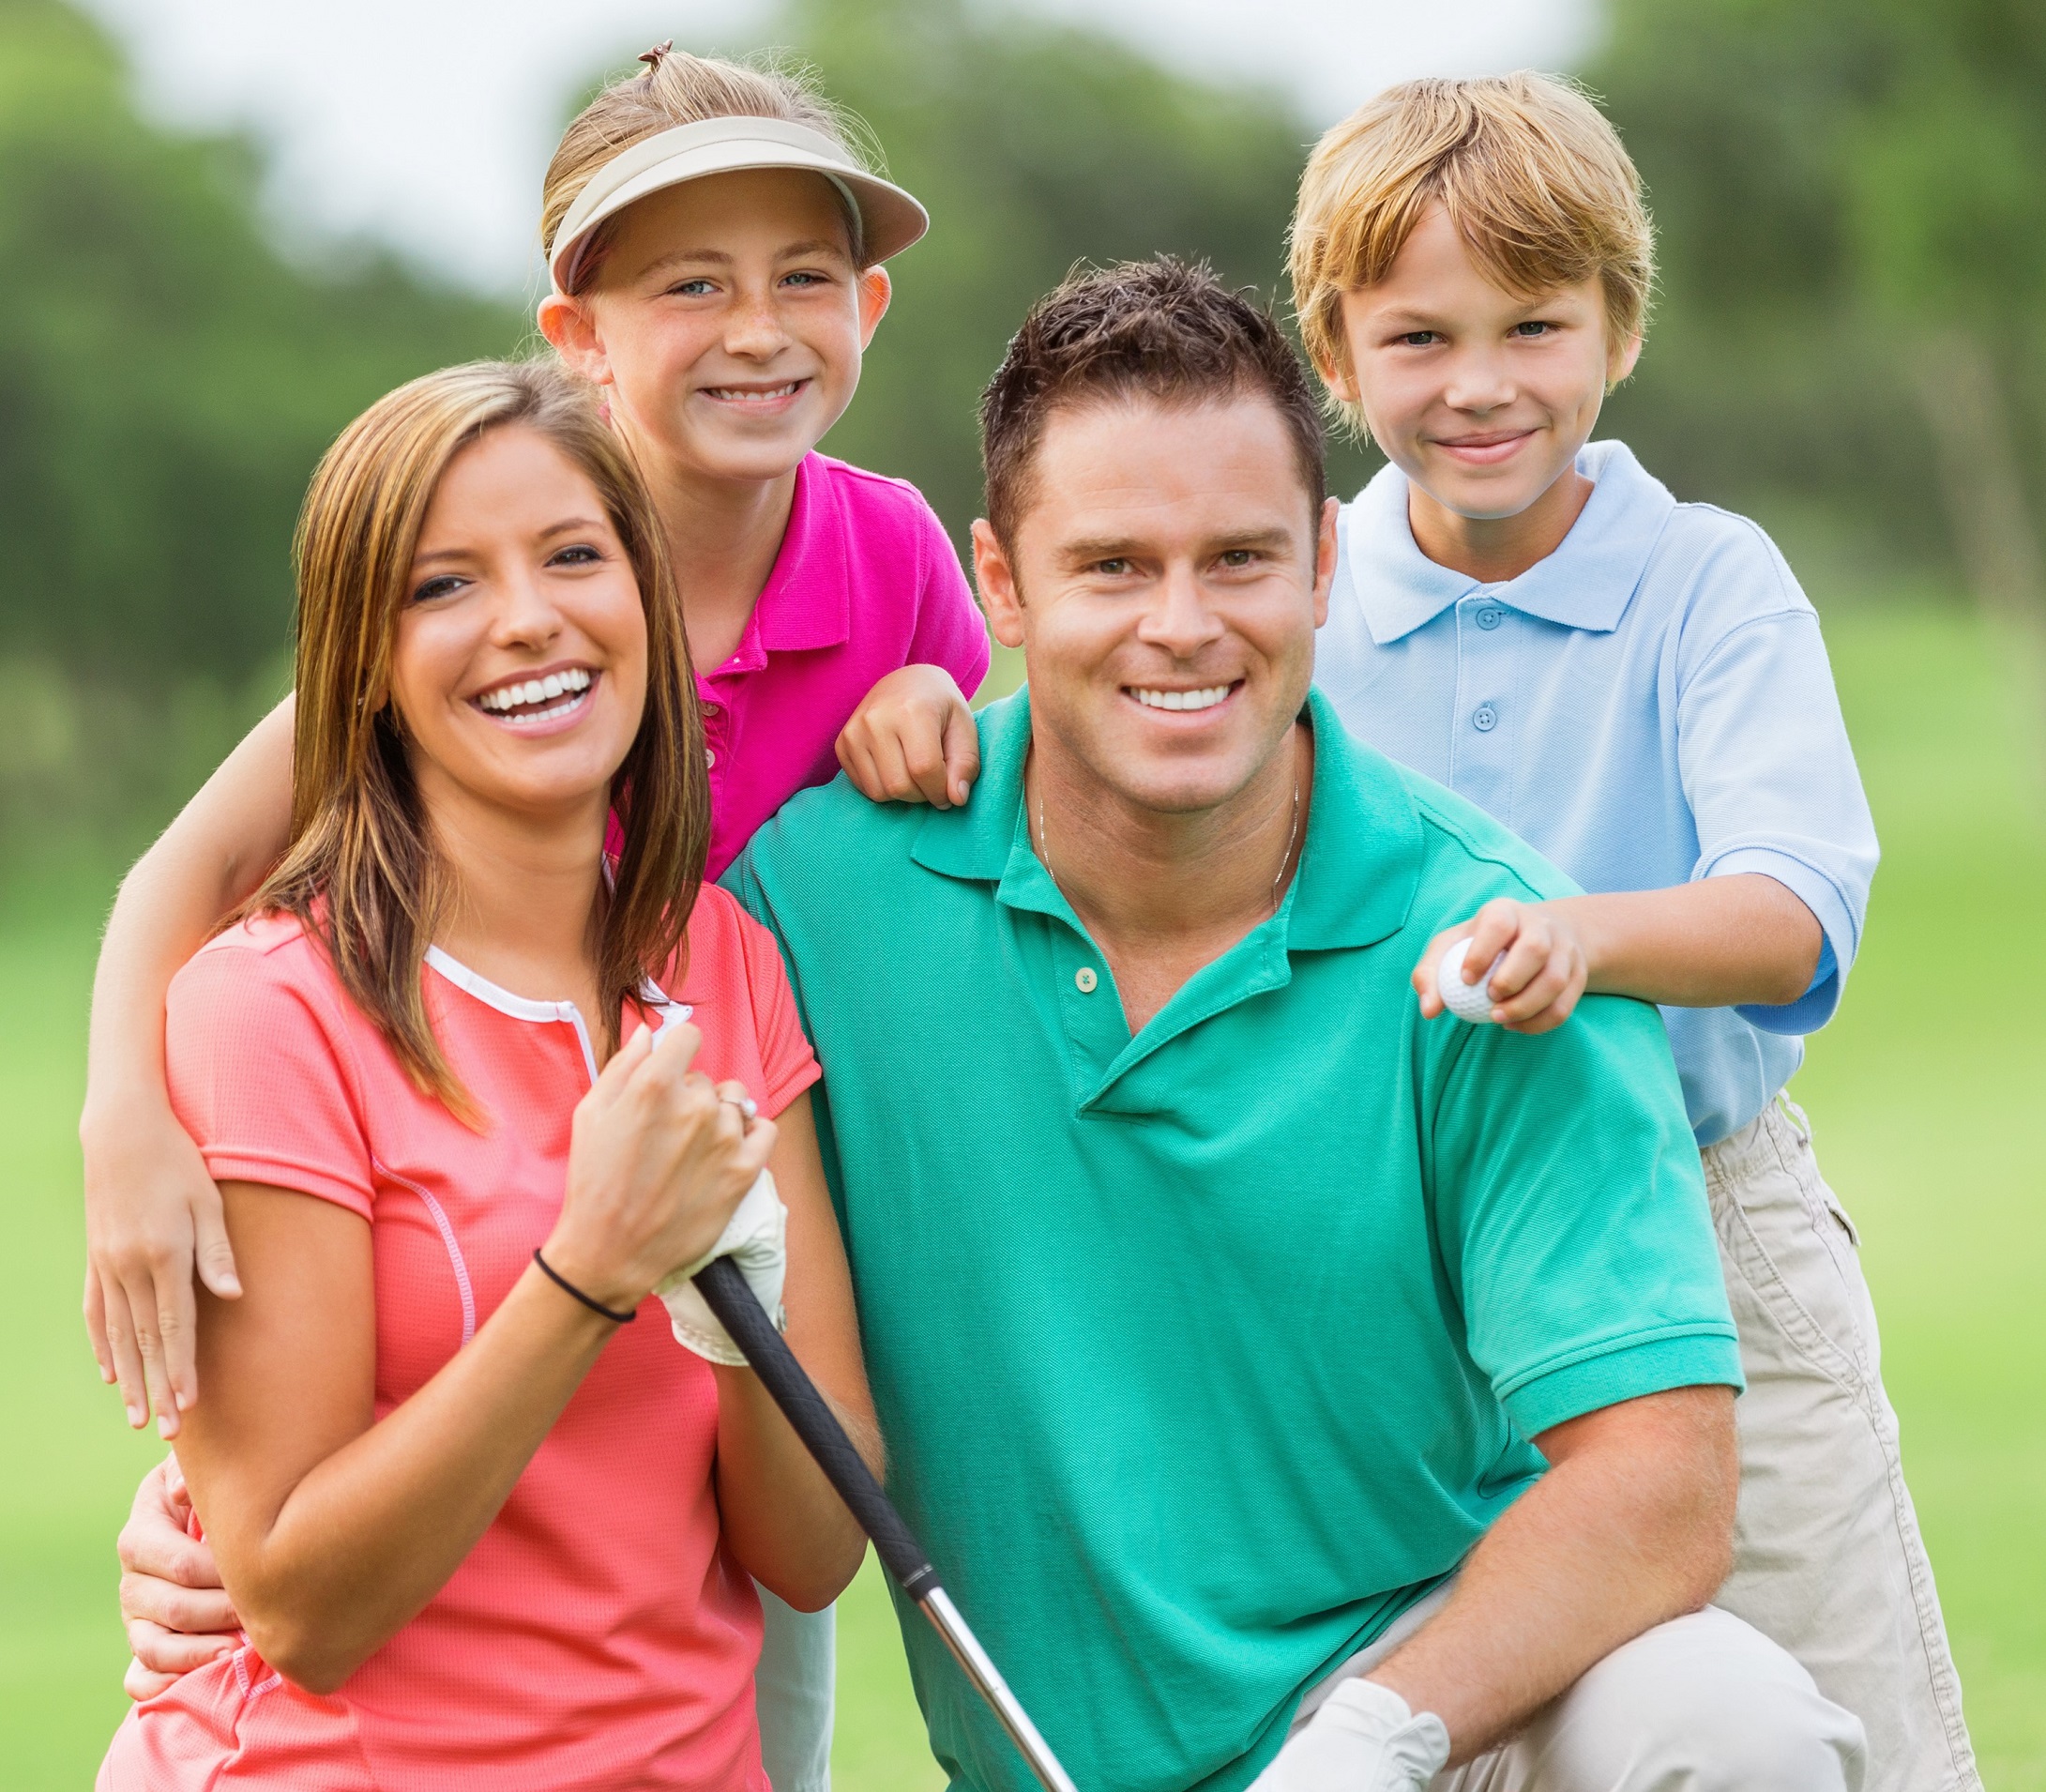 Happy family playing golf together on green course.